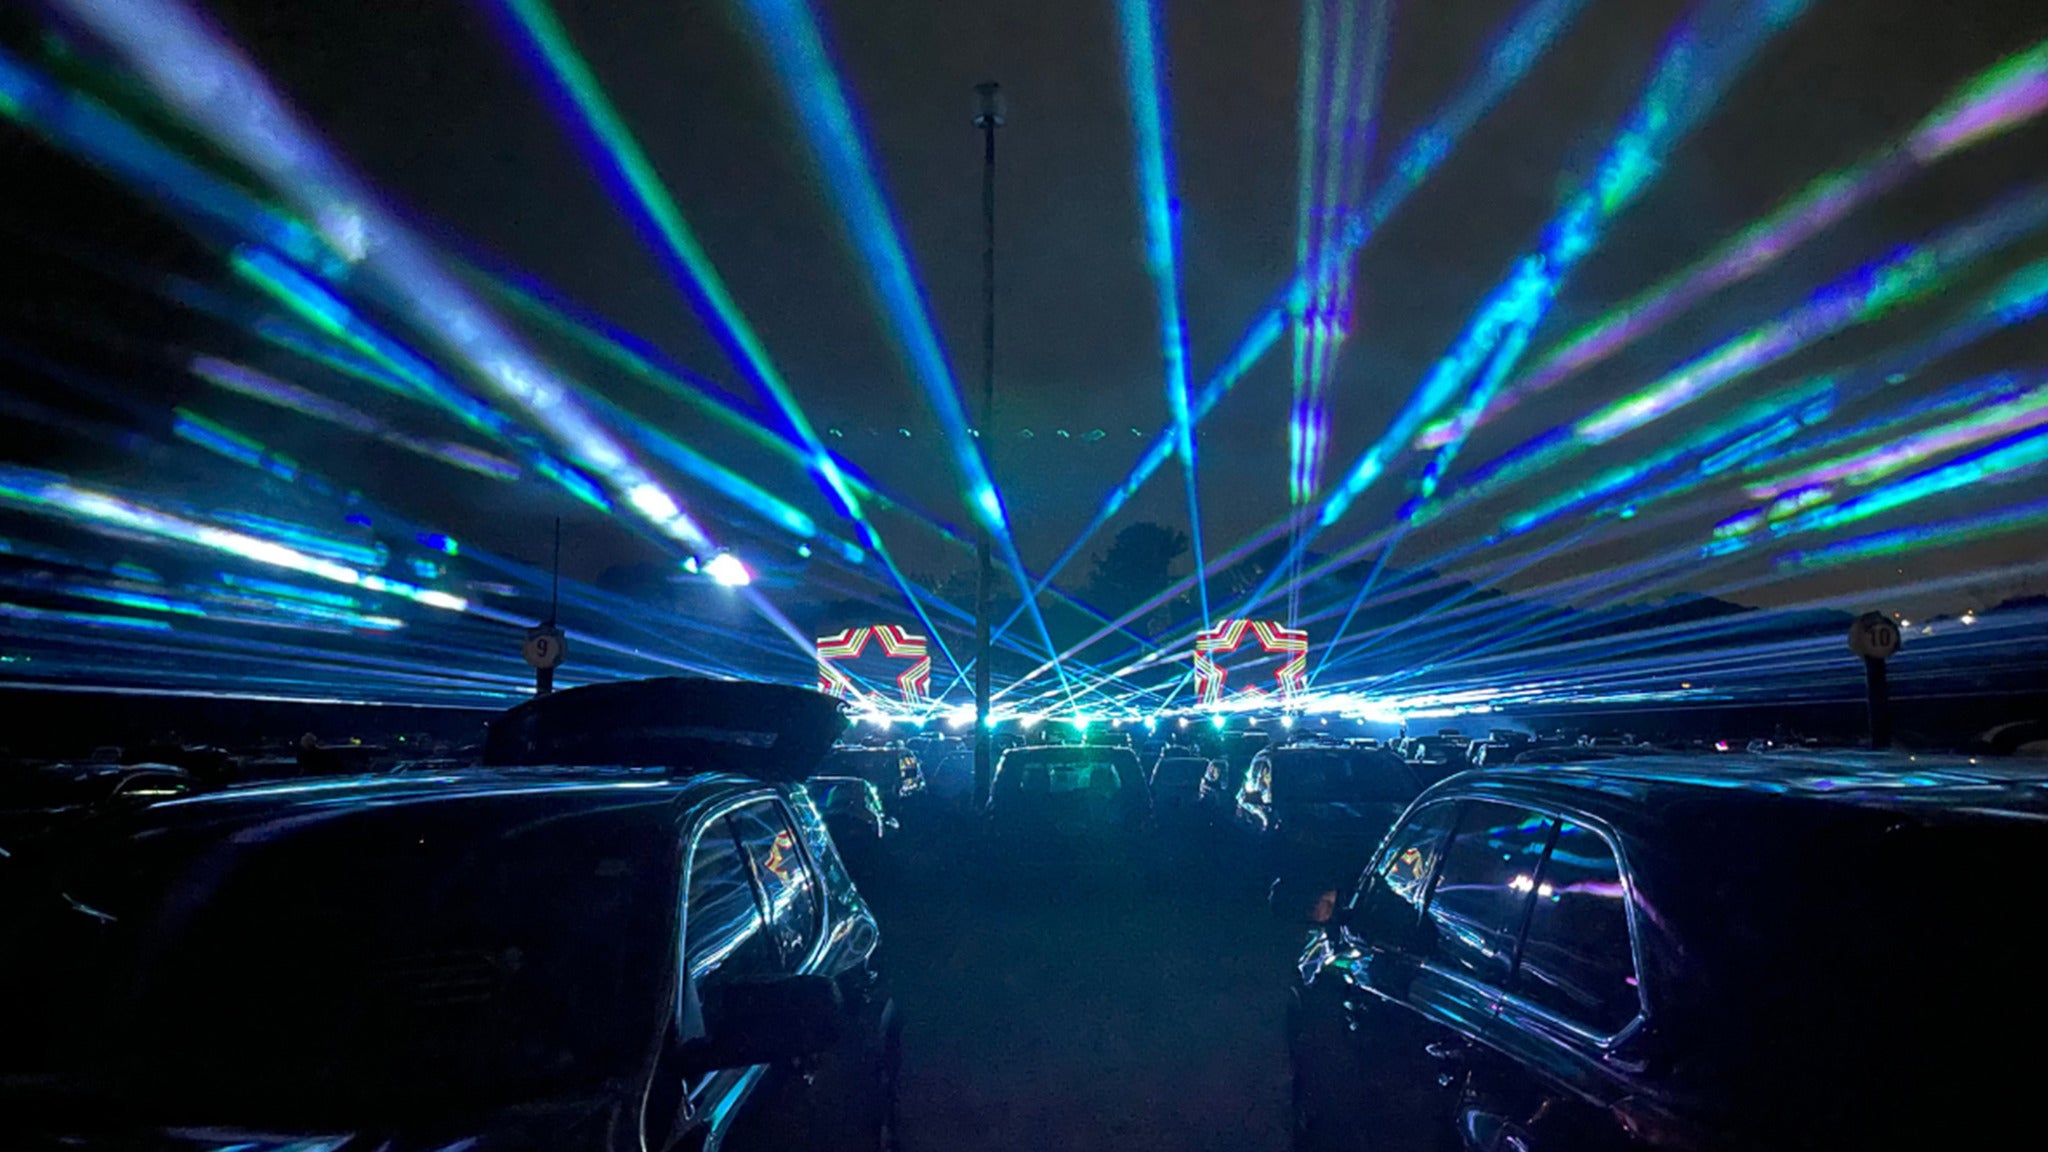 DriveIn Laser Show By Cabin Fever: Front Row - $99.99 Per Car+Fees